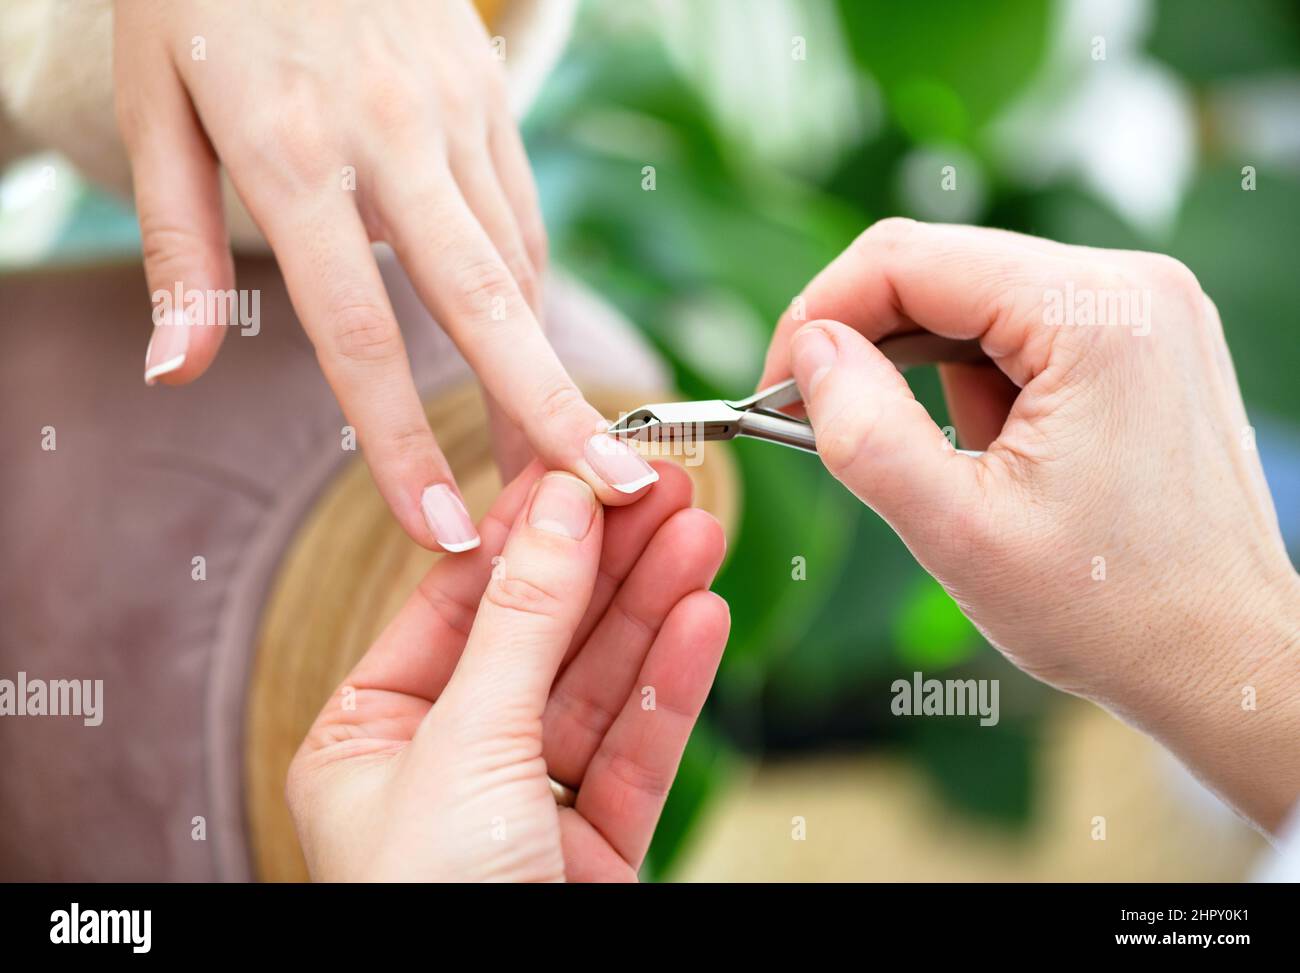 Cuticle Cutting. Woman Hands Receiving Manicure and Nail Care Procedure.  Close Up Concept Stock Image - Image of cuticle, manicurist: 169051517